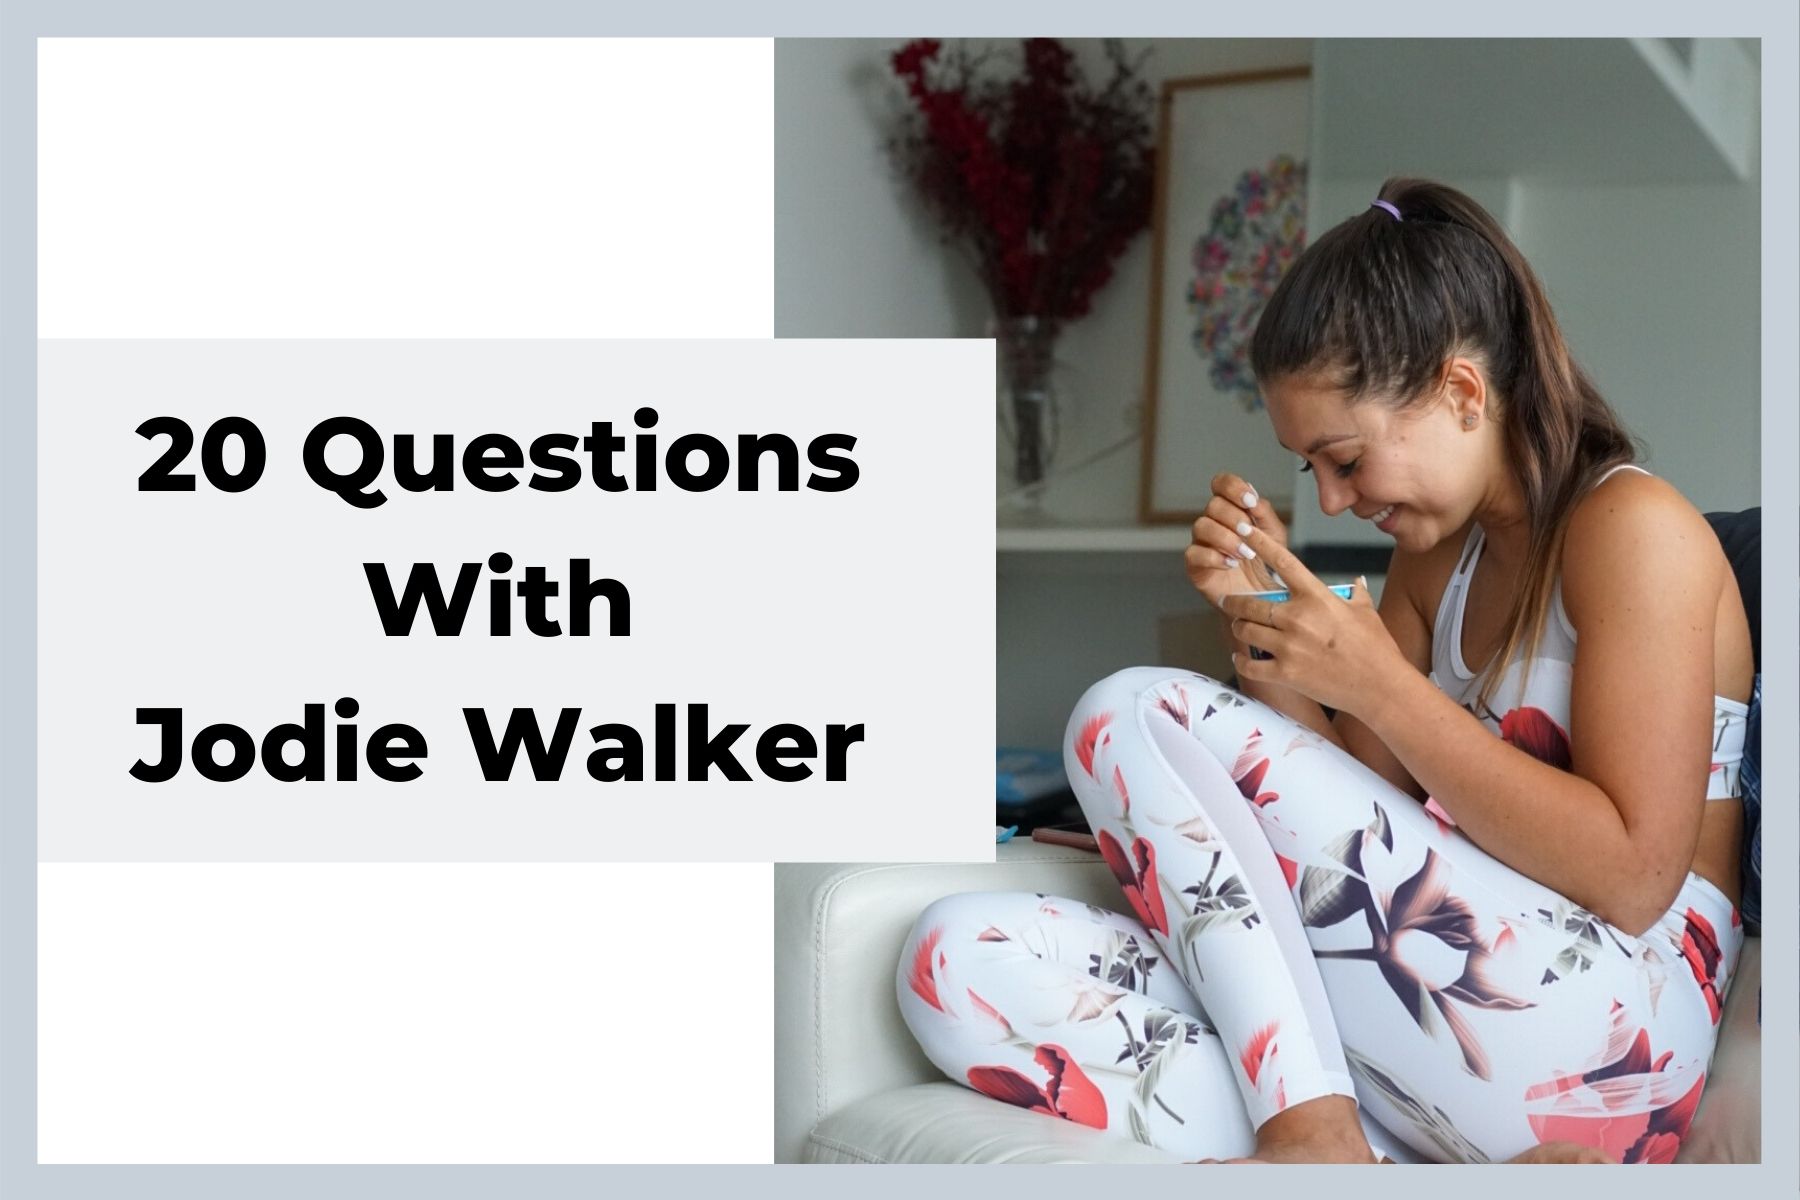 20 Questions with Jodie Walker